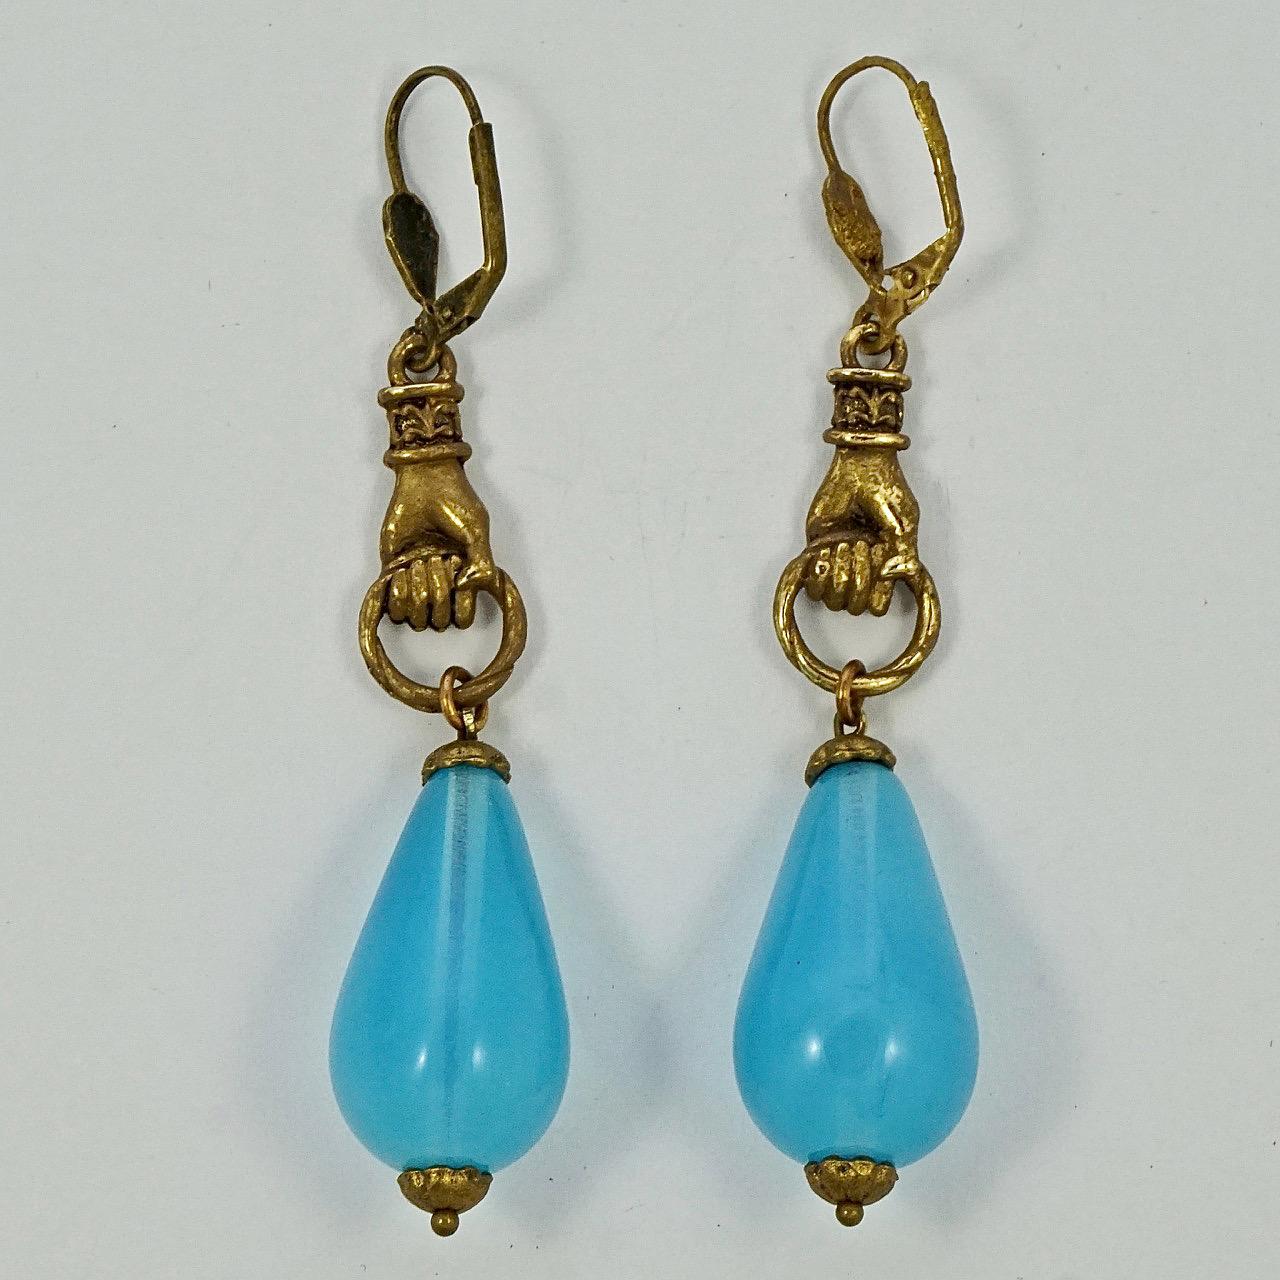 Fabulous gold plated lever back hand earrings, with beautiful blue opaline drops. Measuring length 8 cm / 3.15 inches including the lever backs. The gold plating is quite rough. The drops are in very good condition.

This is a beautiful pair of